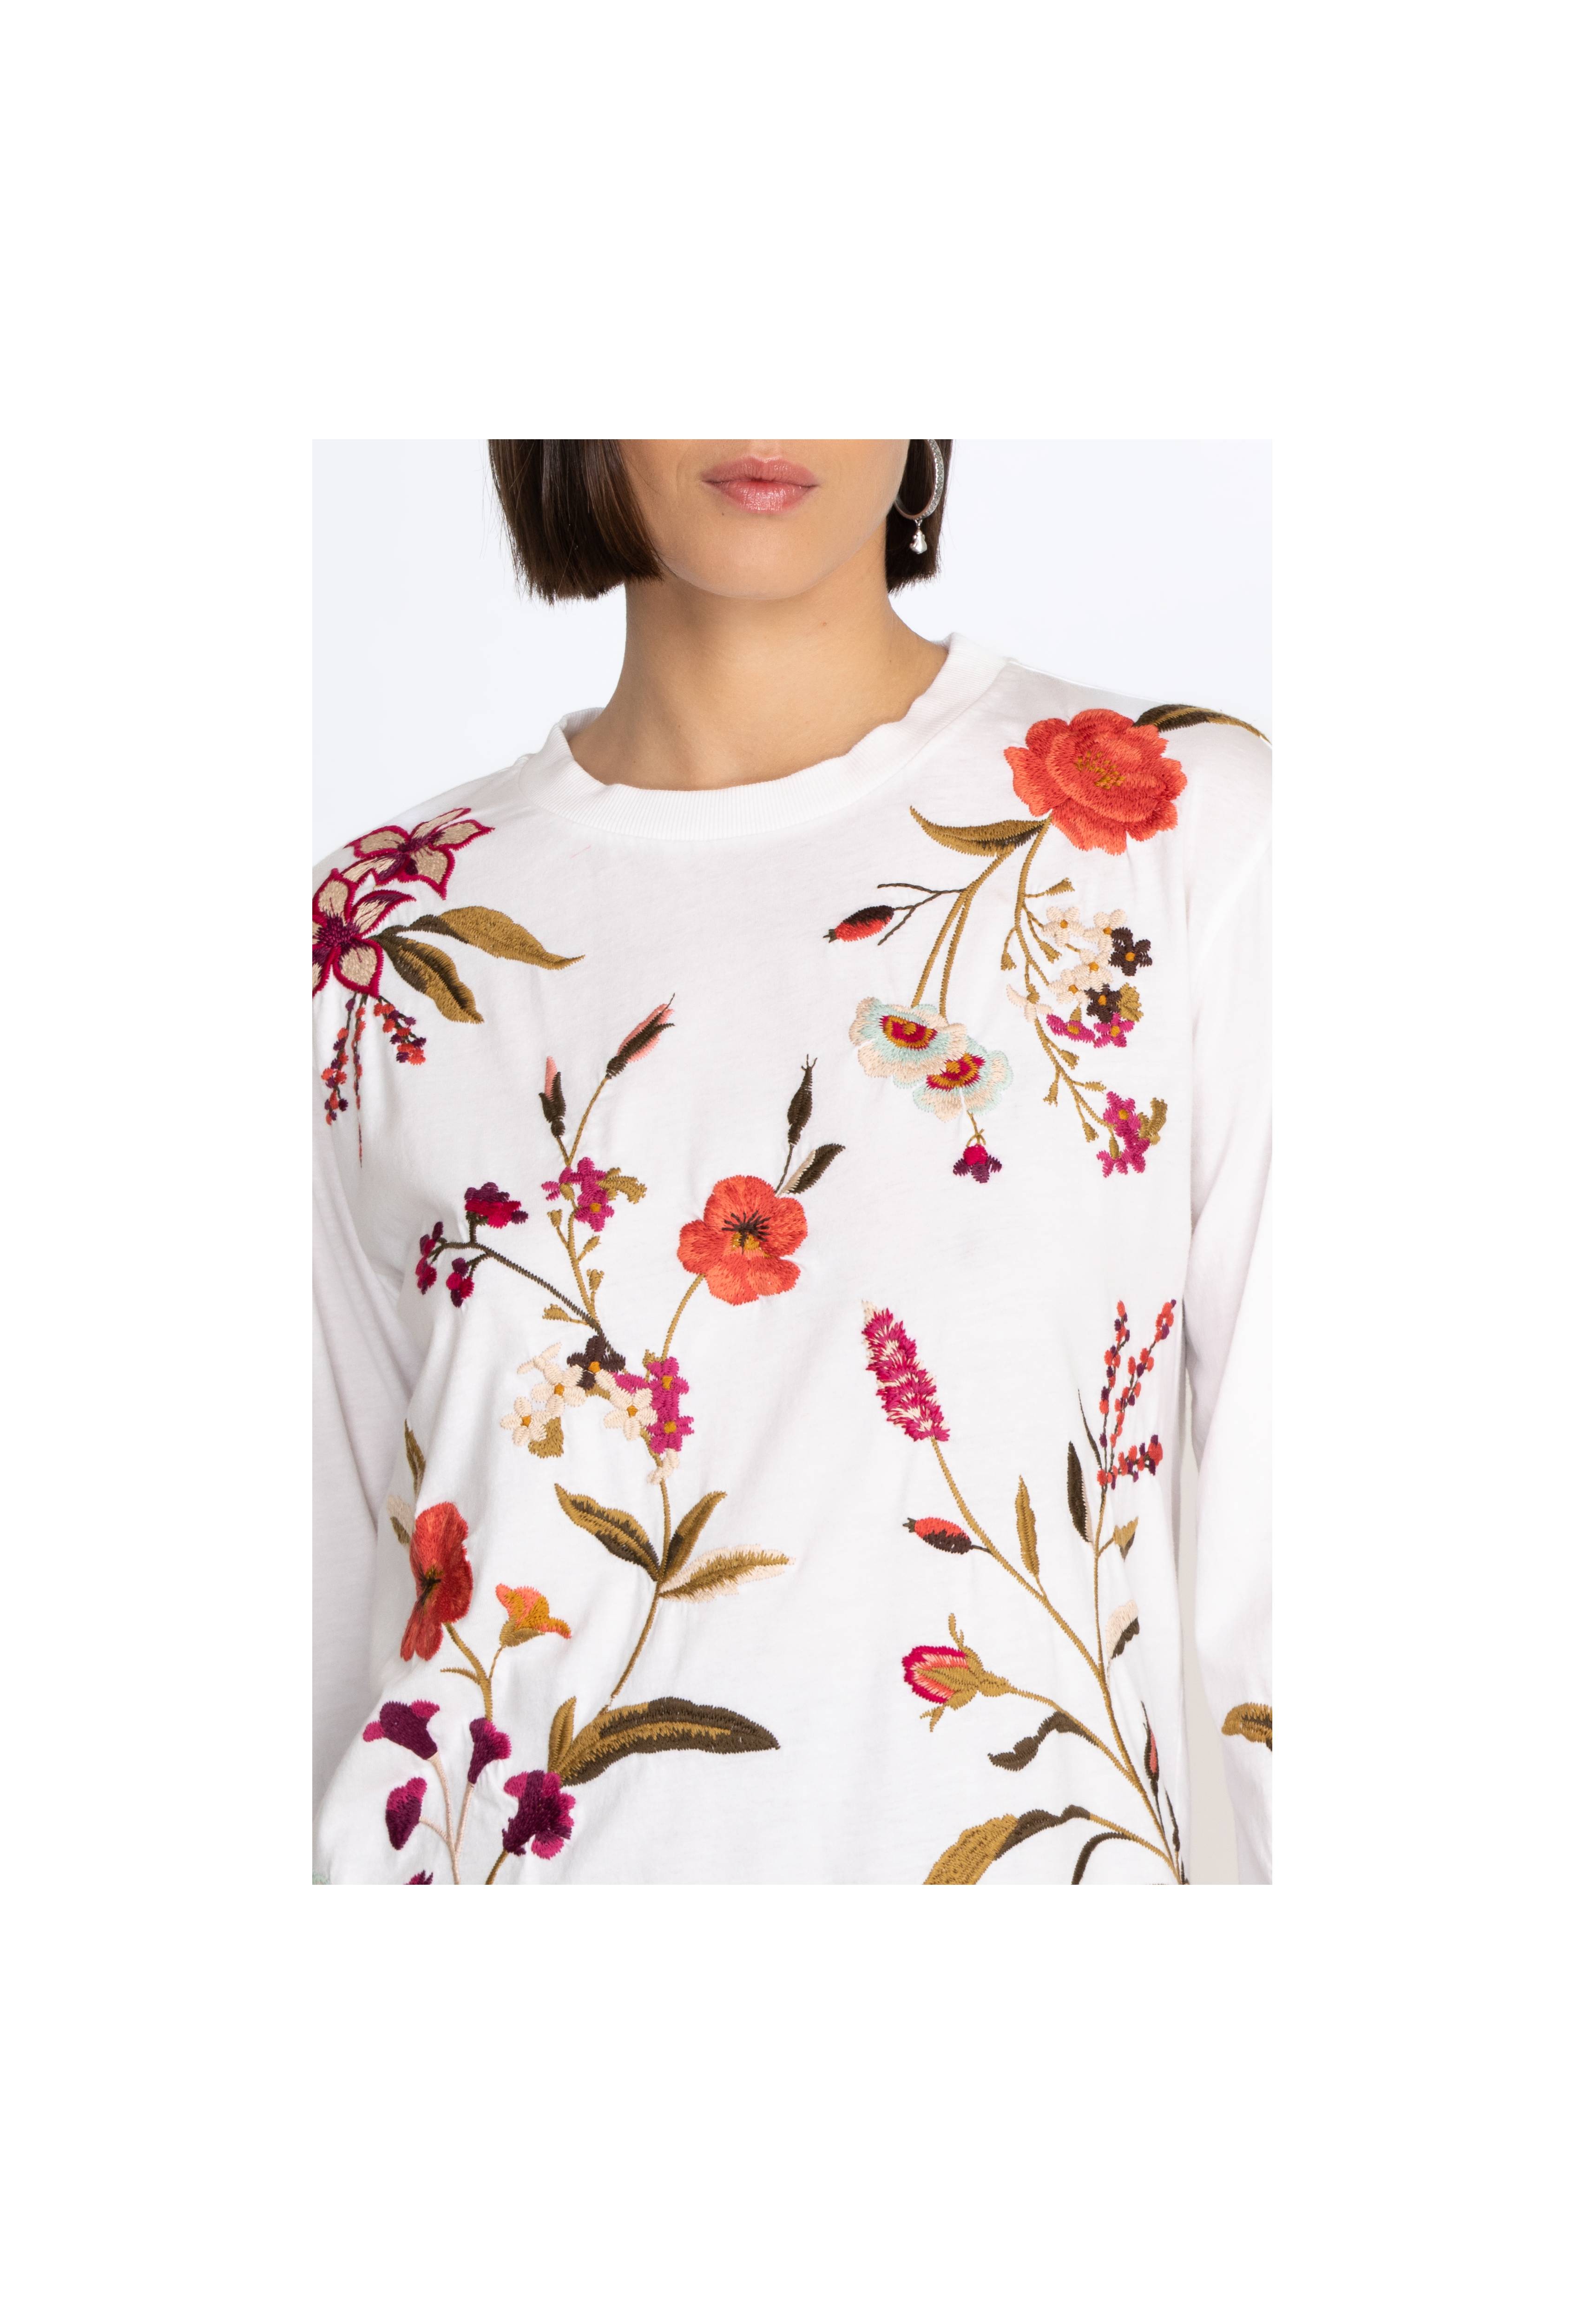 Flore Long Sleeve Tee, , large image number 6